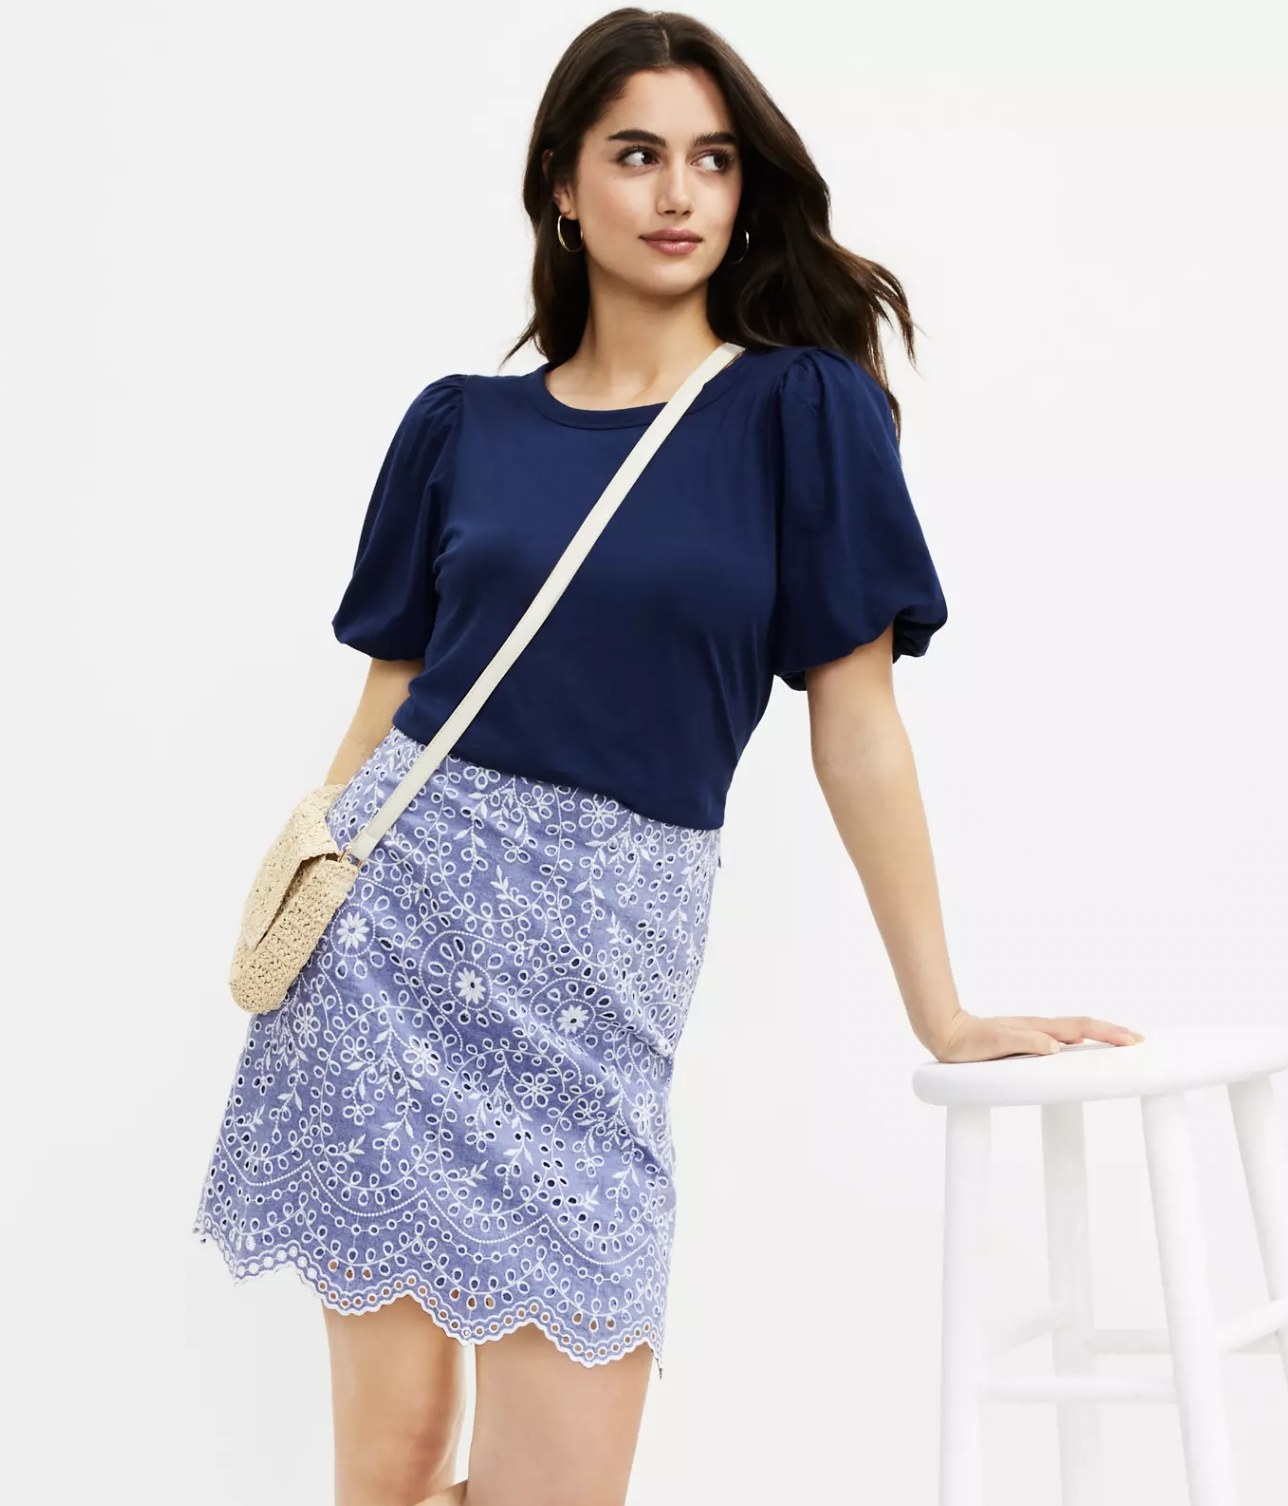 Model wearing the blue scalloped mini skirt with blue blouse